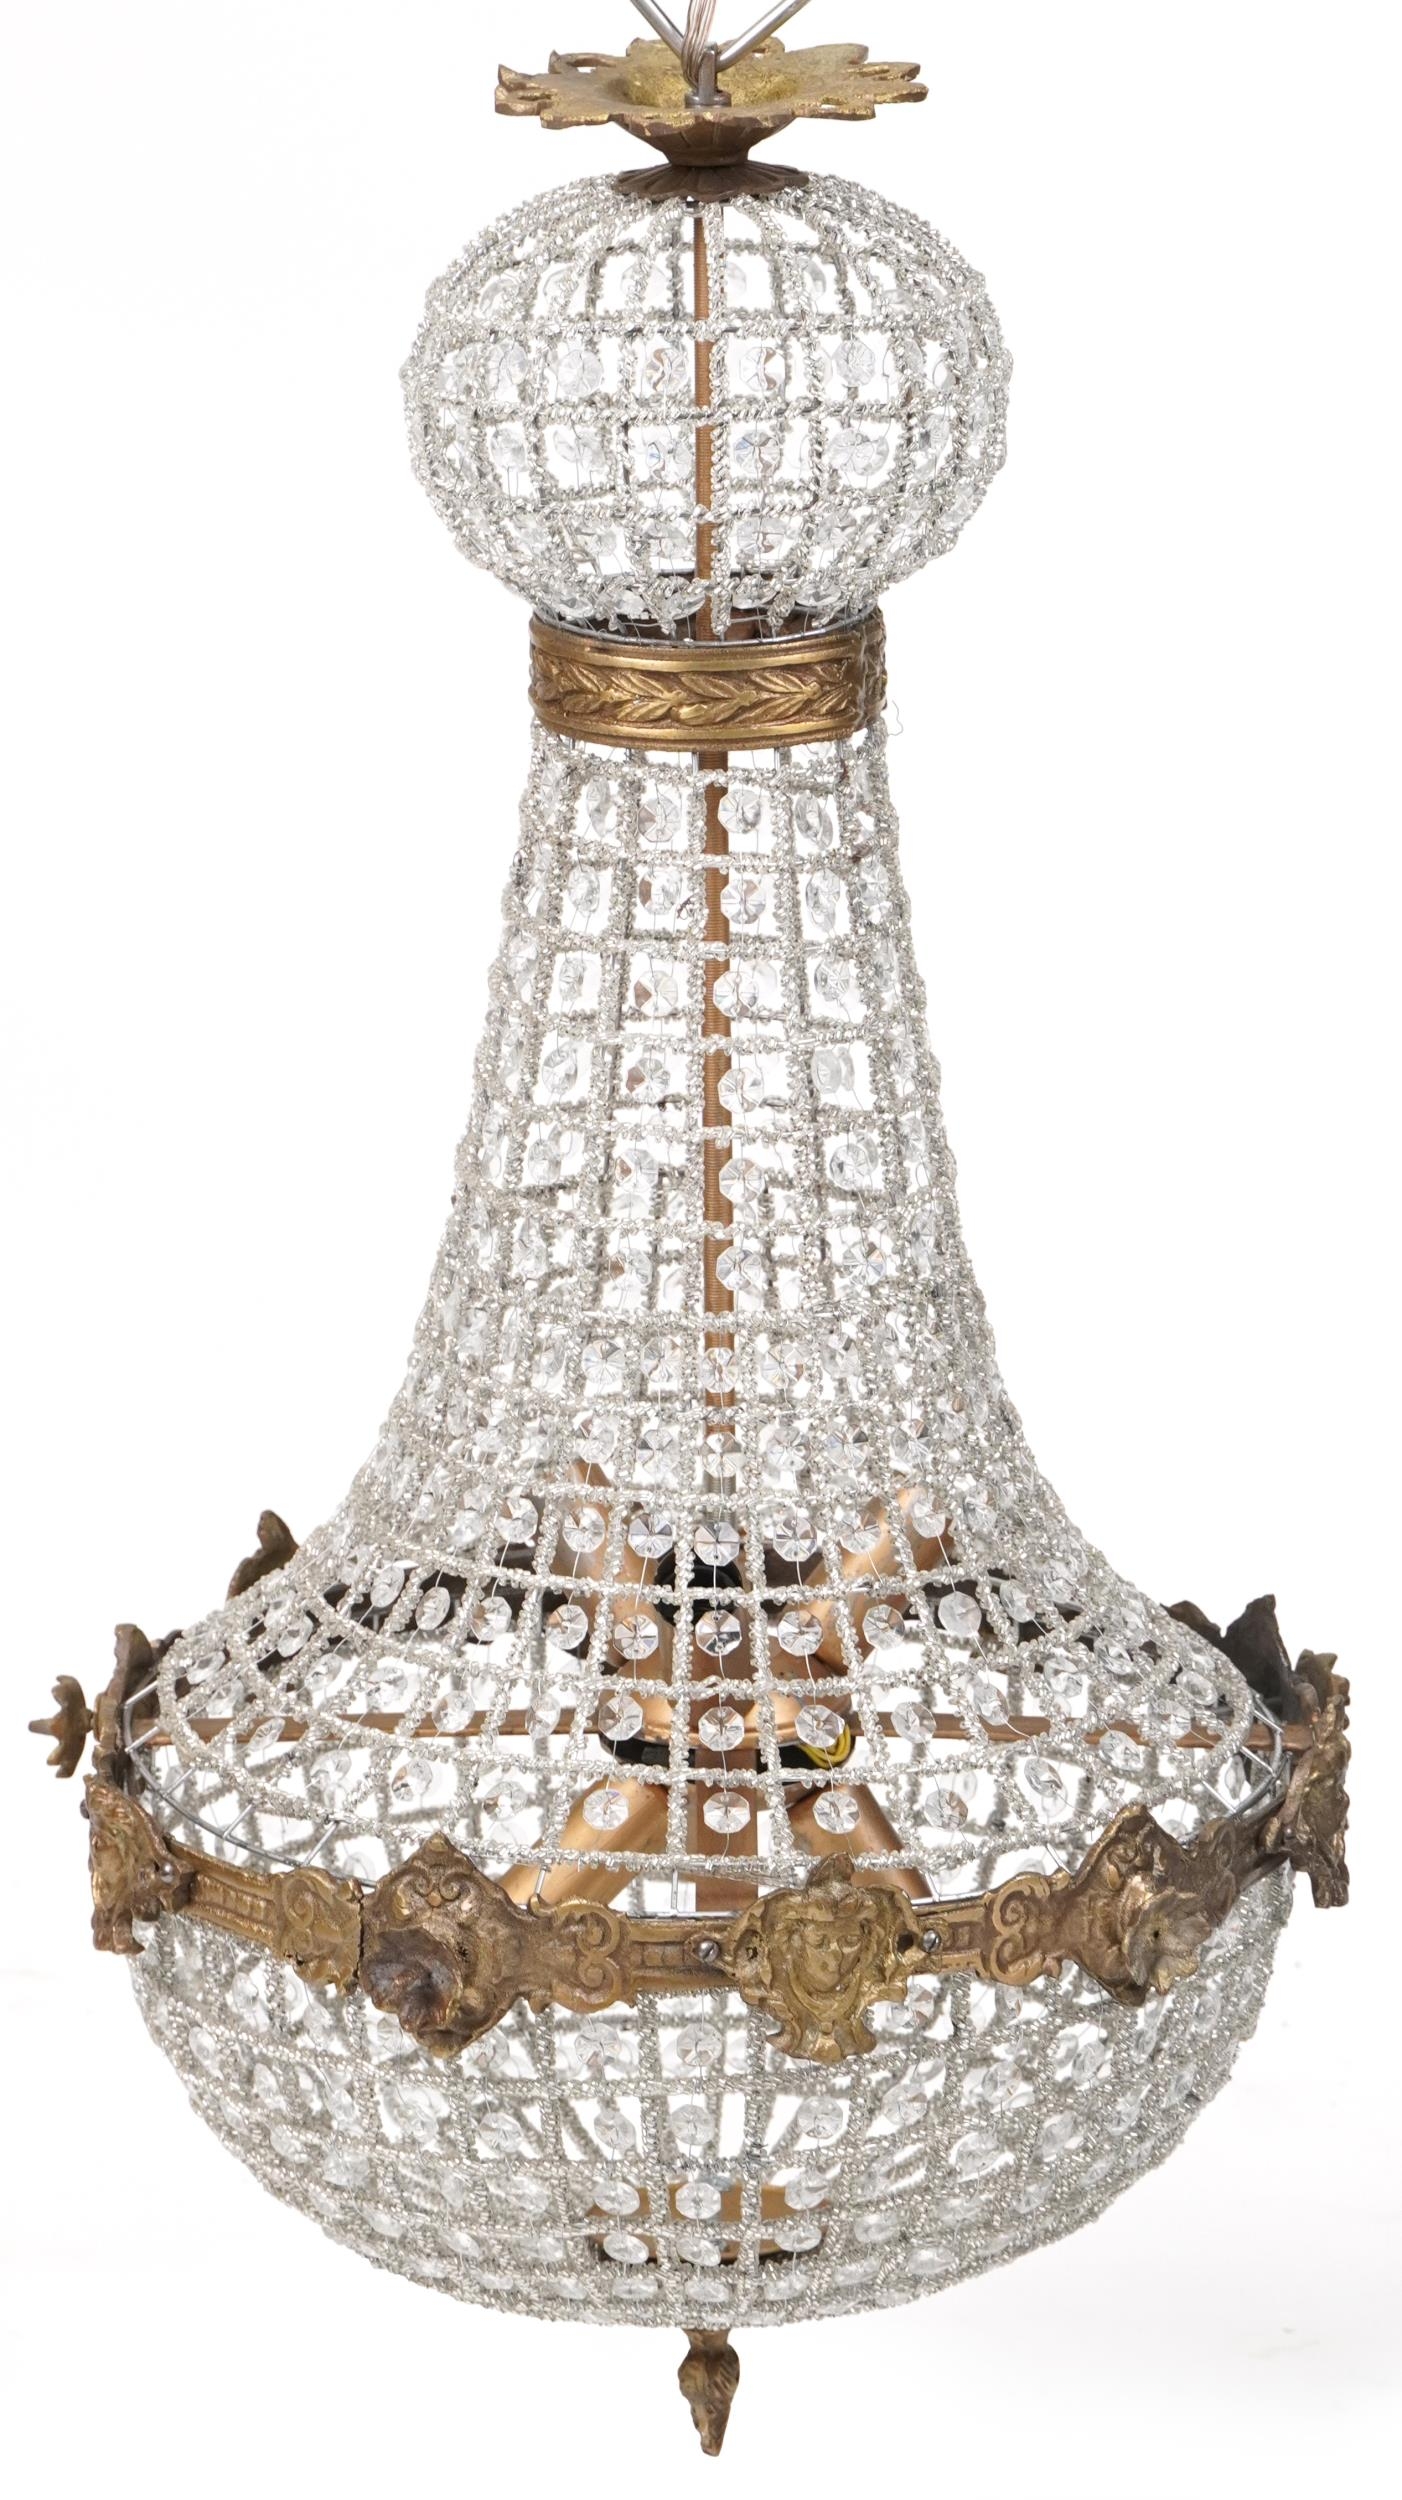 Ornate chandelier with brass mounts, 75cm high